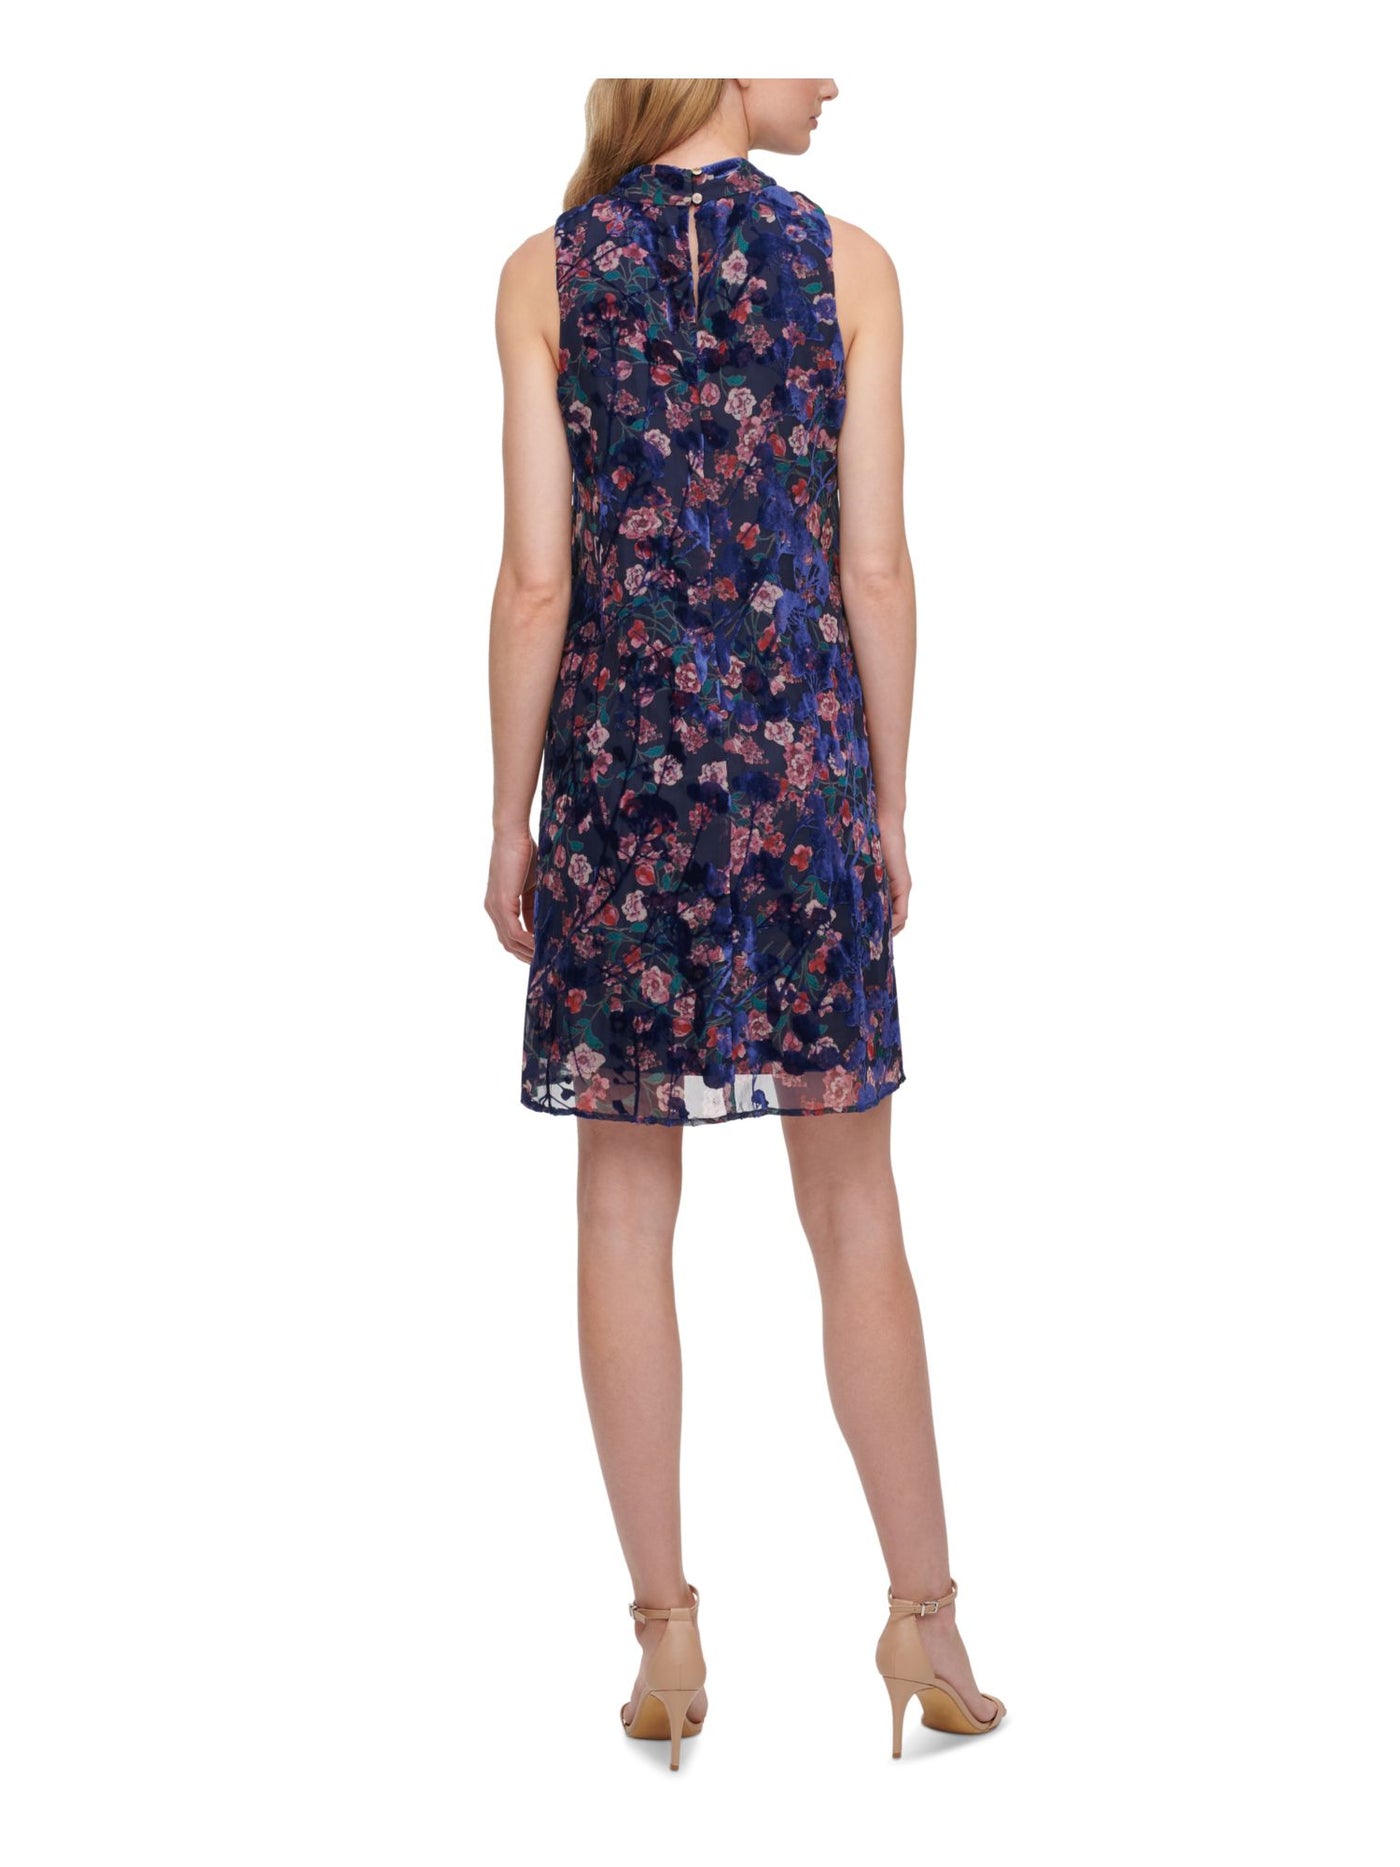 TOMMY HILFIGER Womens Navy Textured Mock-neck Burnout Floral Sleeveless Above The Knee A-Line Dress 8